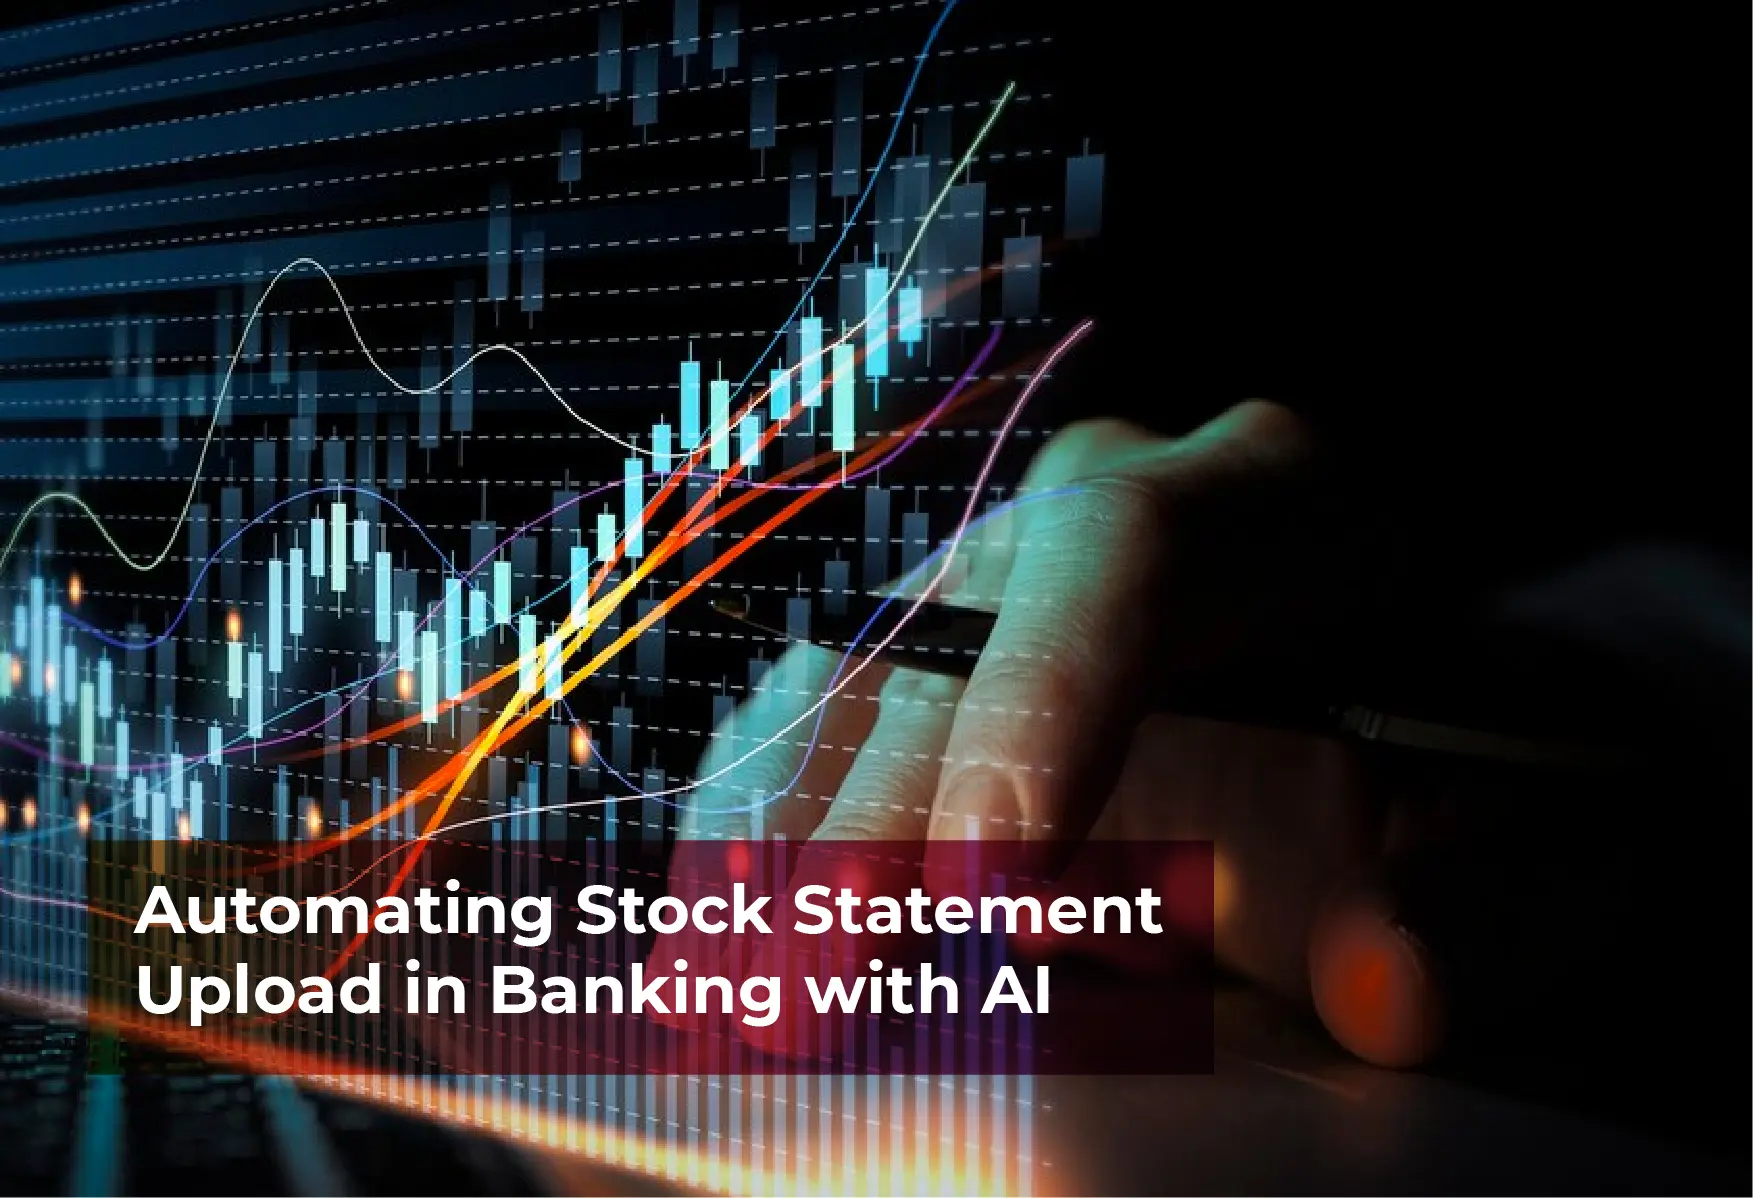 Automating Stock Statement Upload in Banking with AI